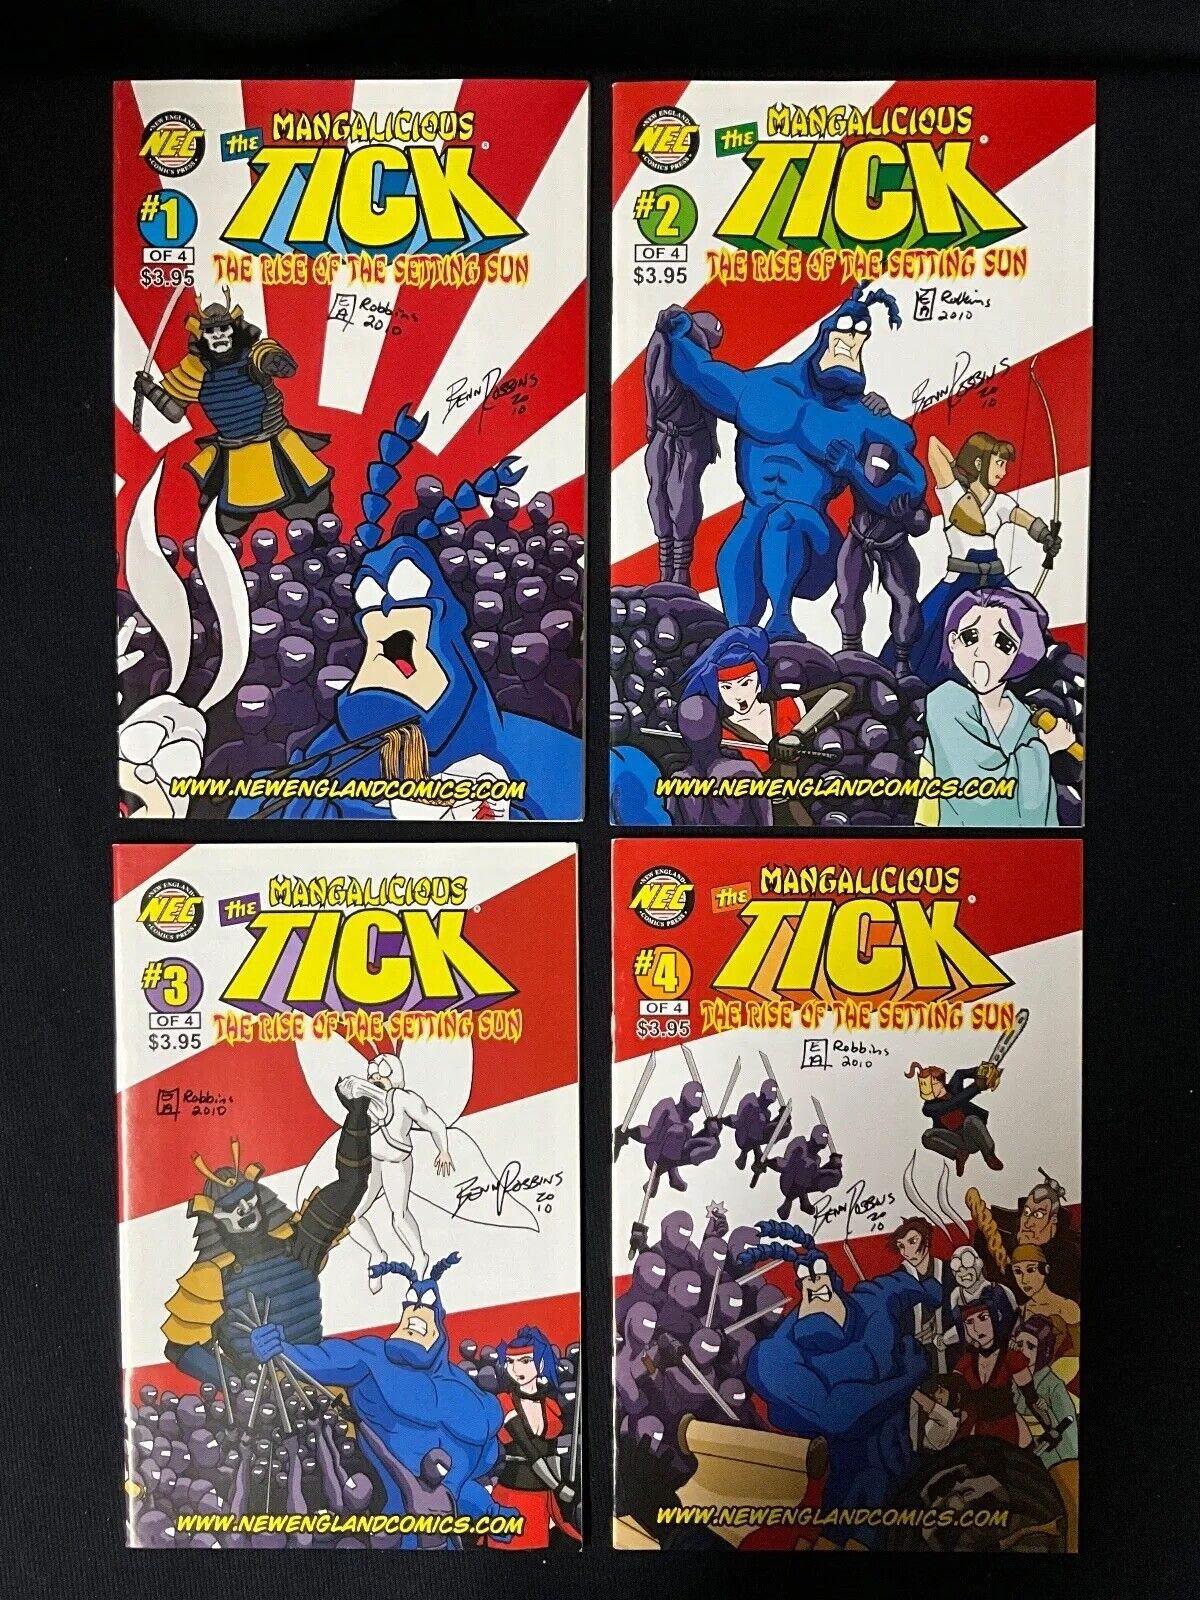 Mangalicious Tick Rise of the Setting Sun #1-4 Complete series, signed by artist